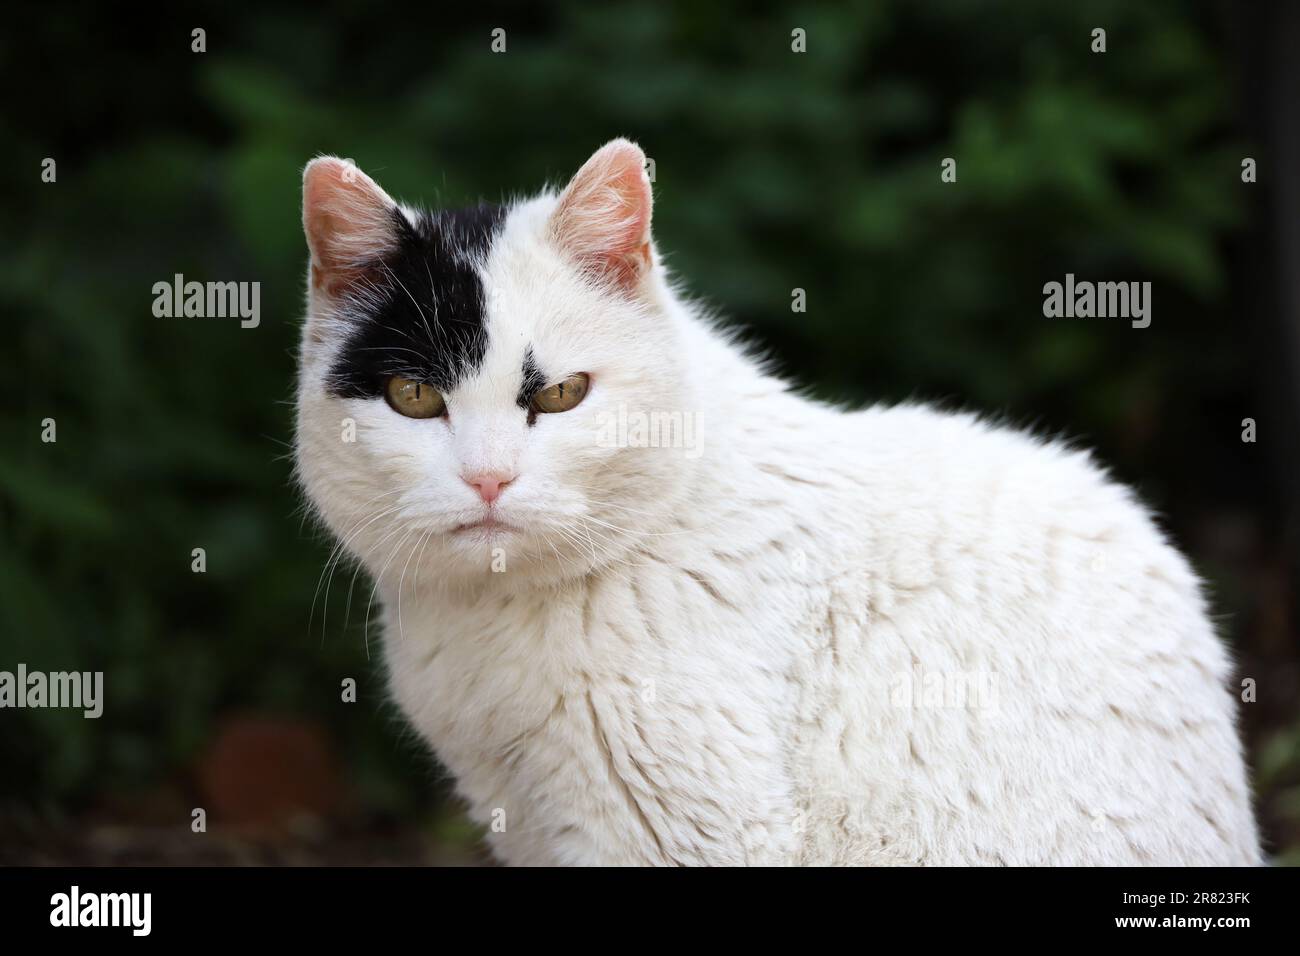 Cat, exotic shorthair, angry-looking face, front view, gaming logo, white  background